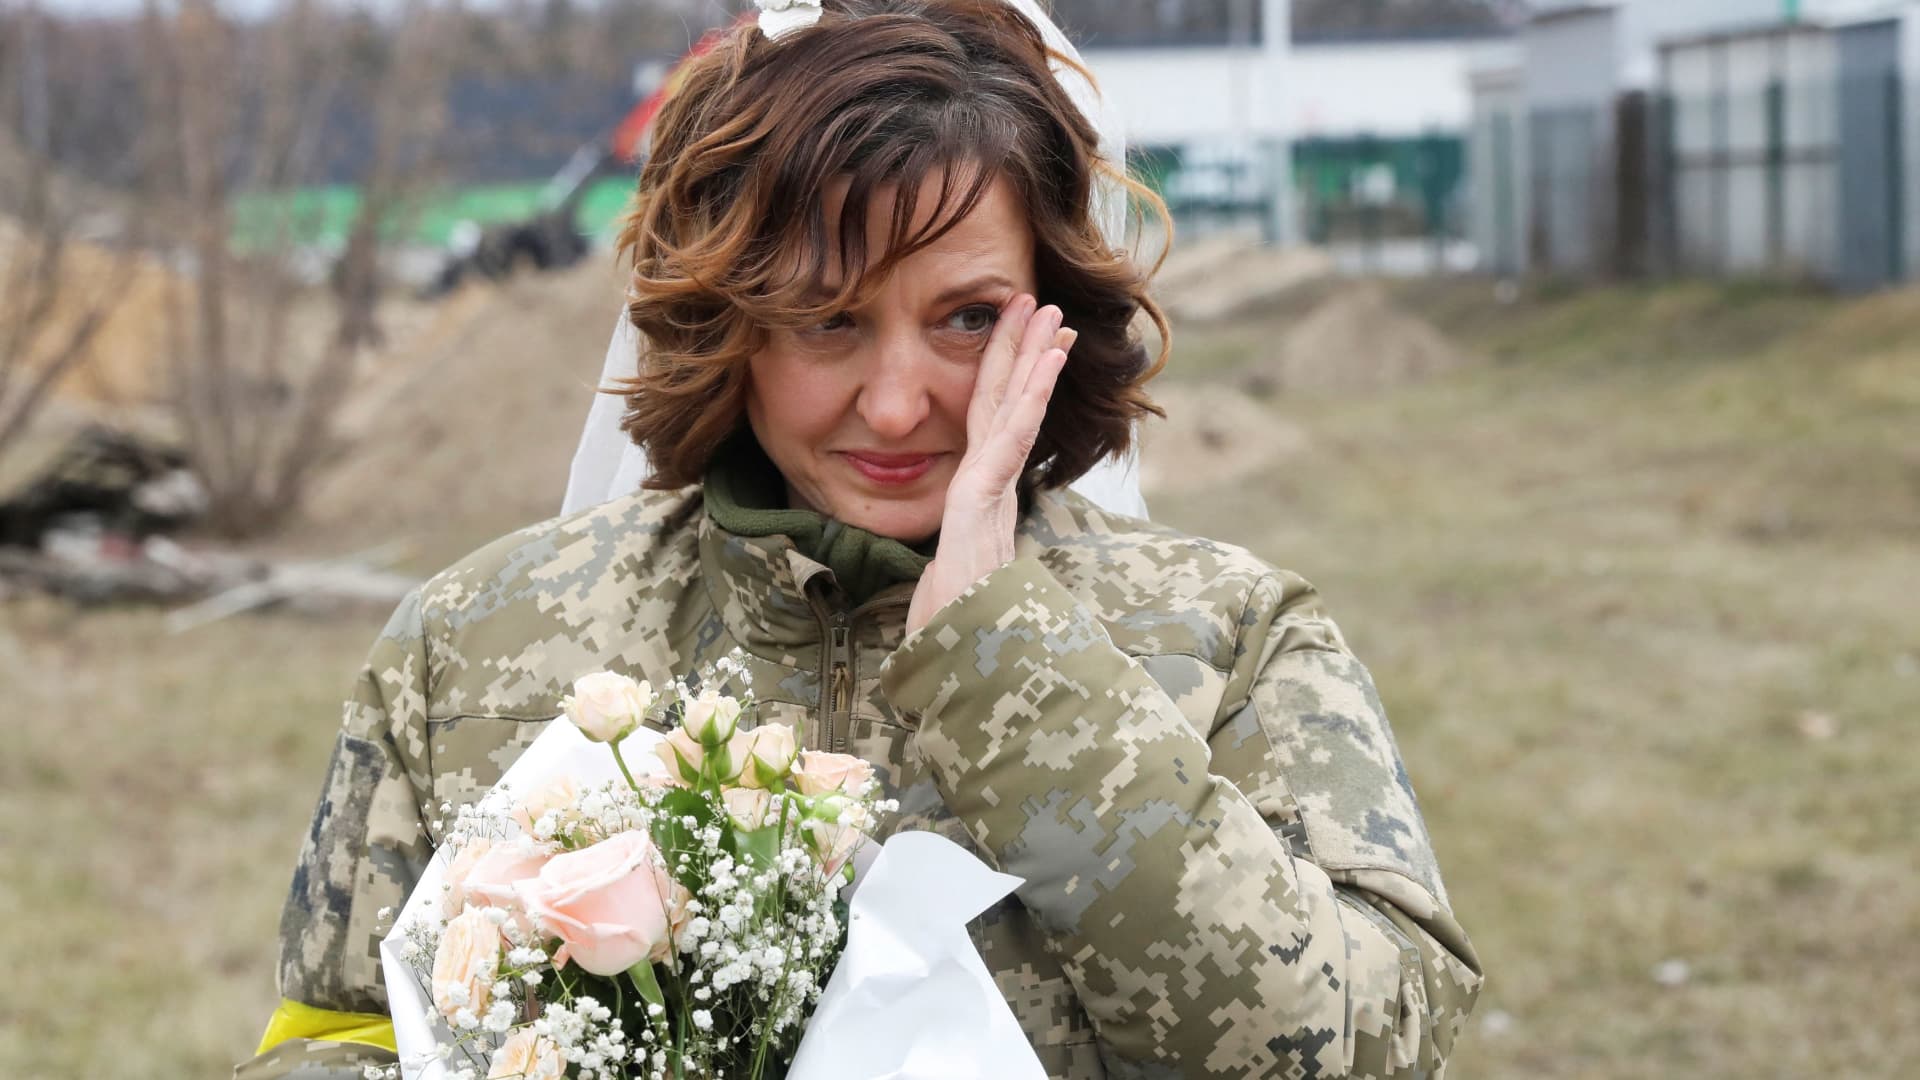 A member of the Ukrainian Territorial Defence Forces Lesia Ivashchenko reacts at her wedding with Valerii Fylymonov during Ukraine-Russia conflict, at a checkpoint in Kyiv, Ukraine March 6, 2022.